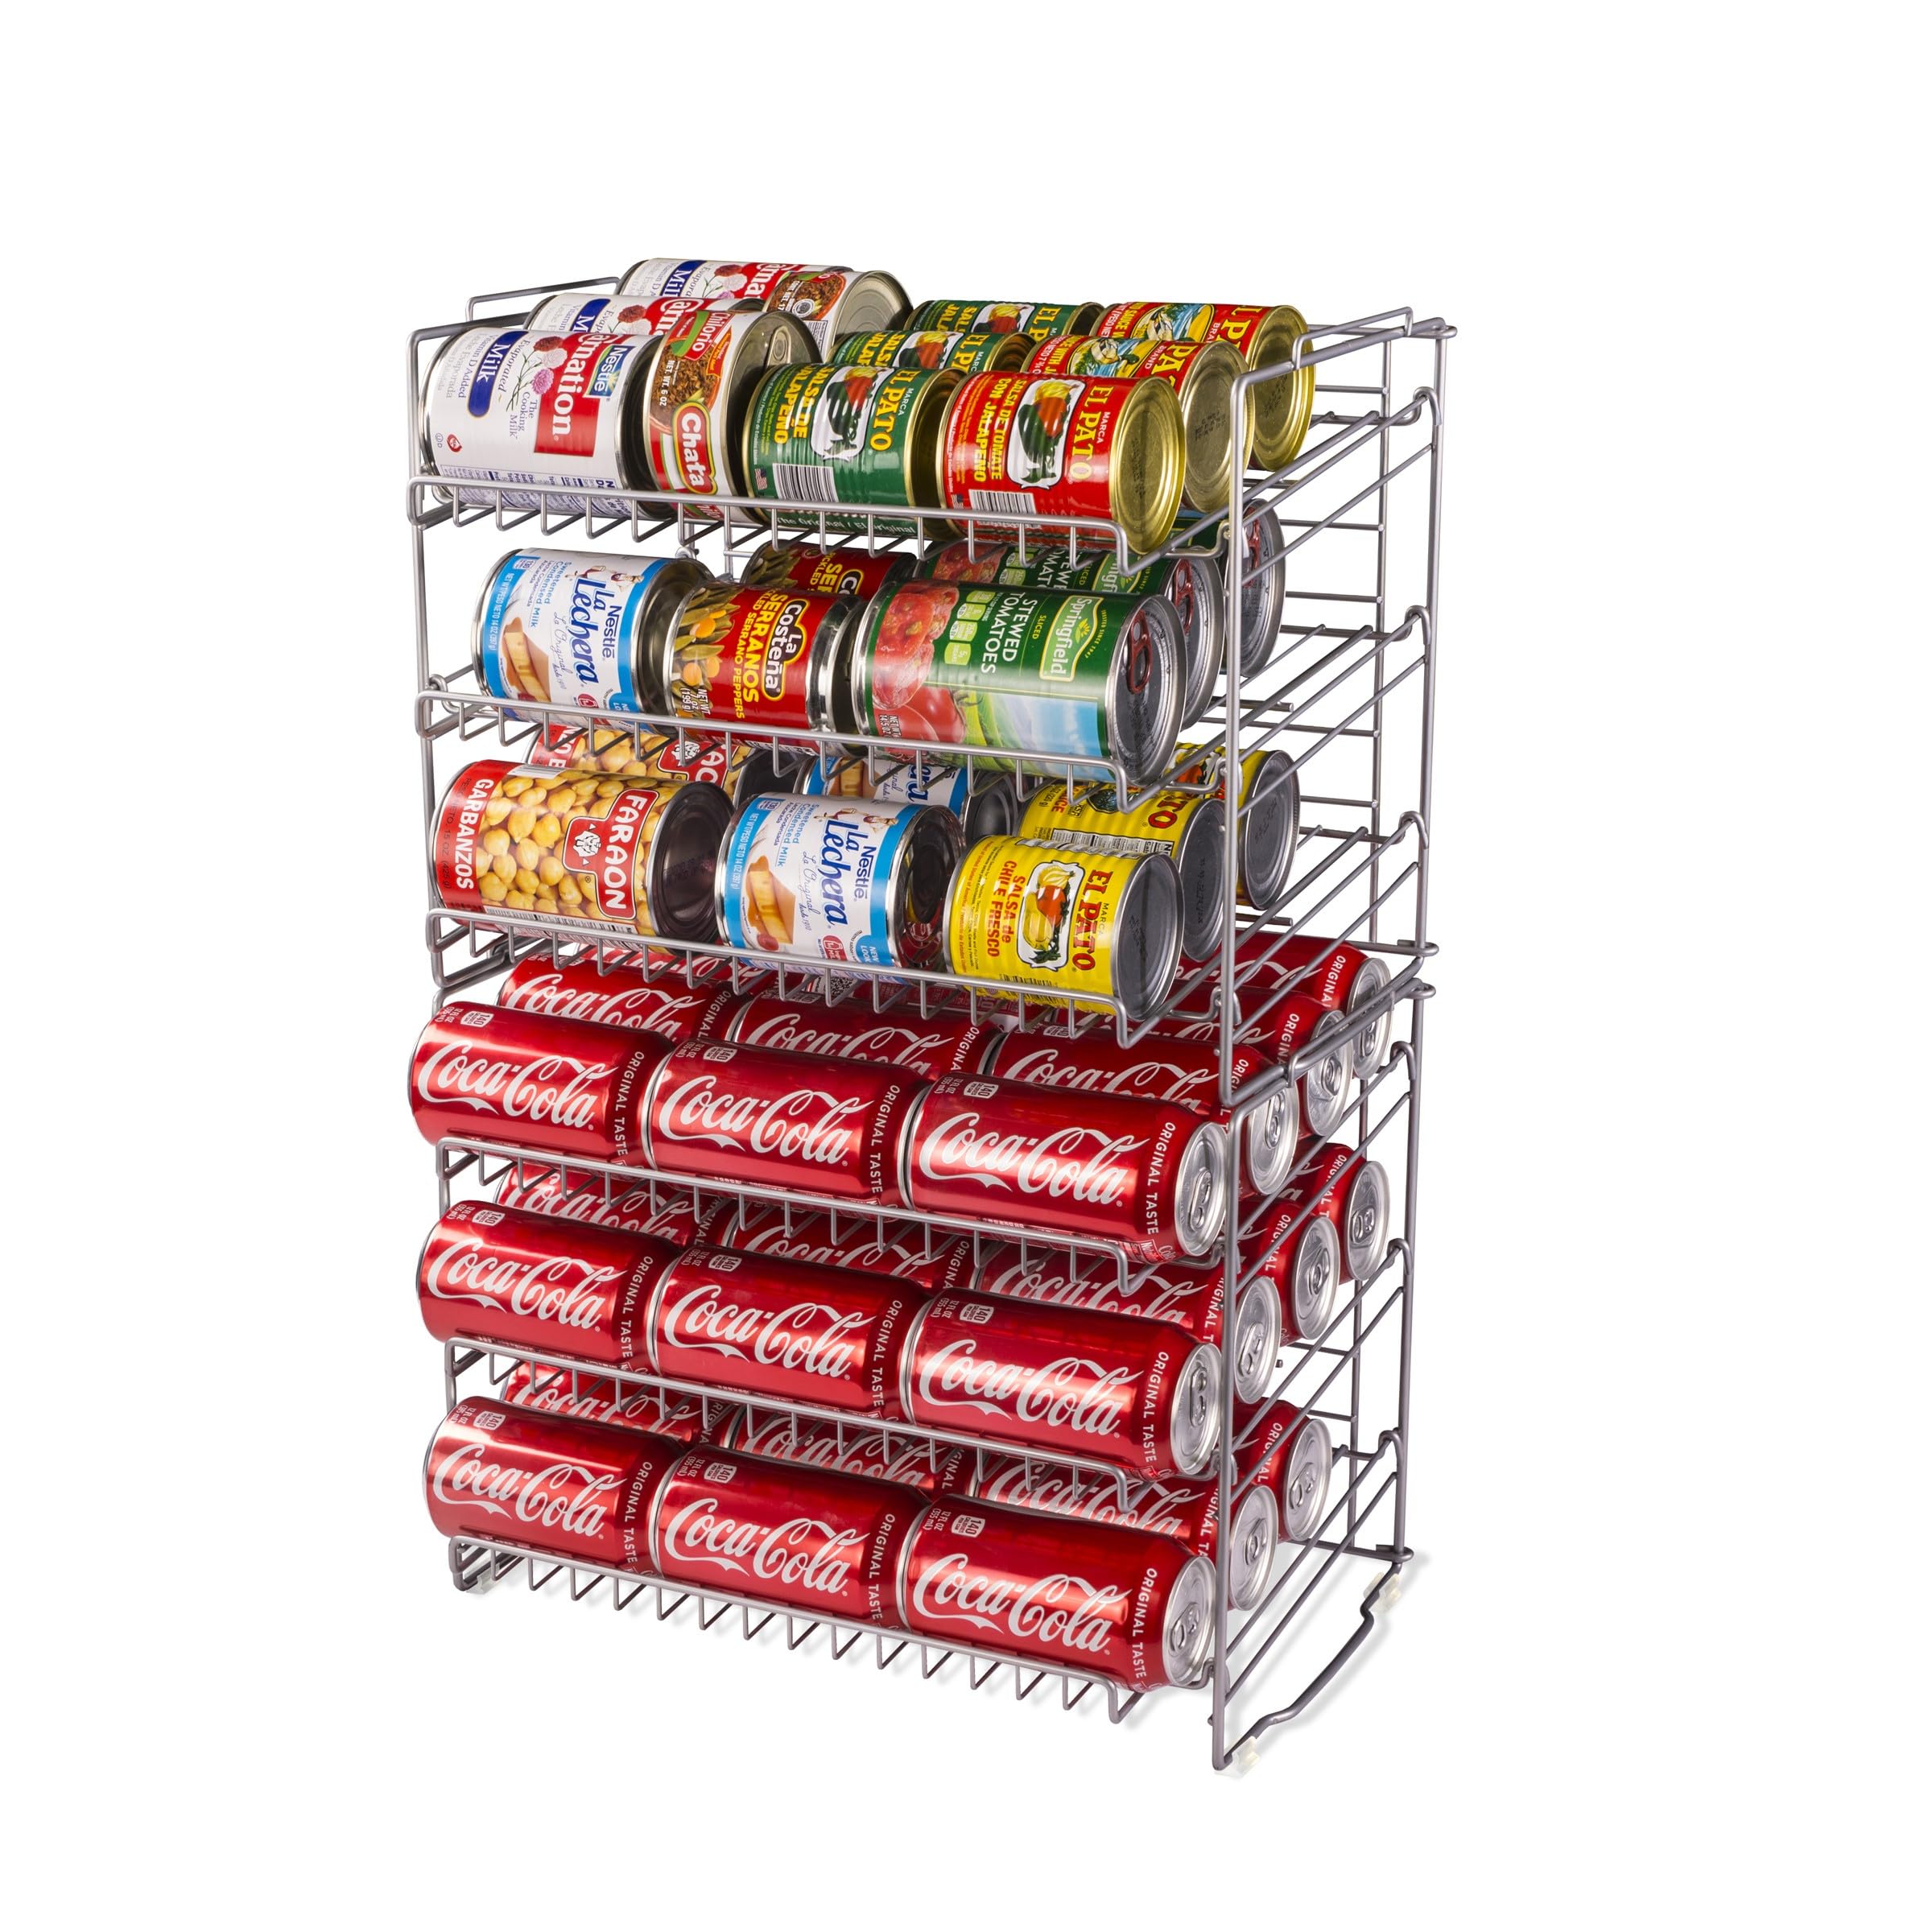 6-Tier Atlantic Gravity-Fed Steel Compact Double Can Rack (Silver) $16.50 + Free Shipping w/ Prime or on $35+